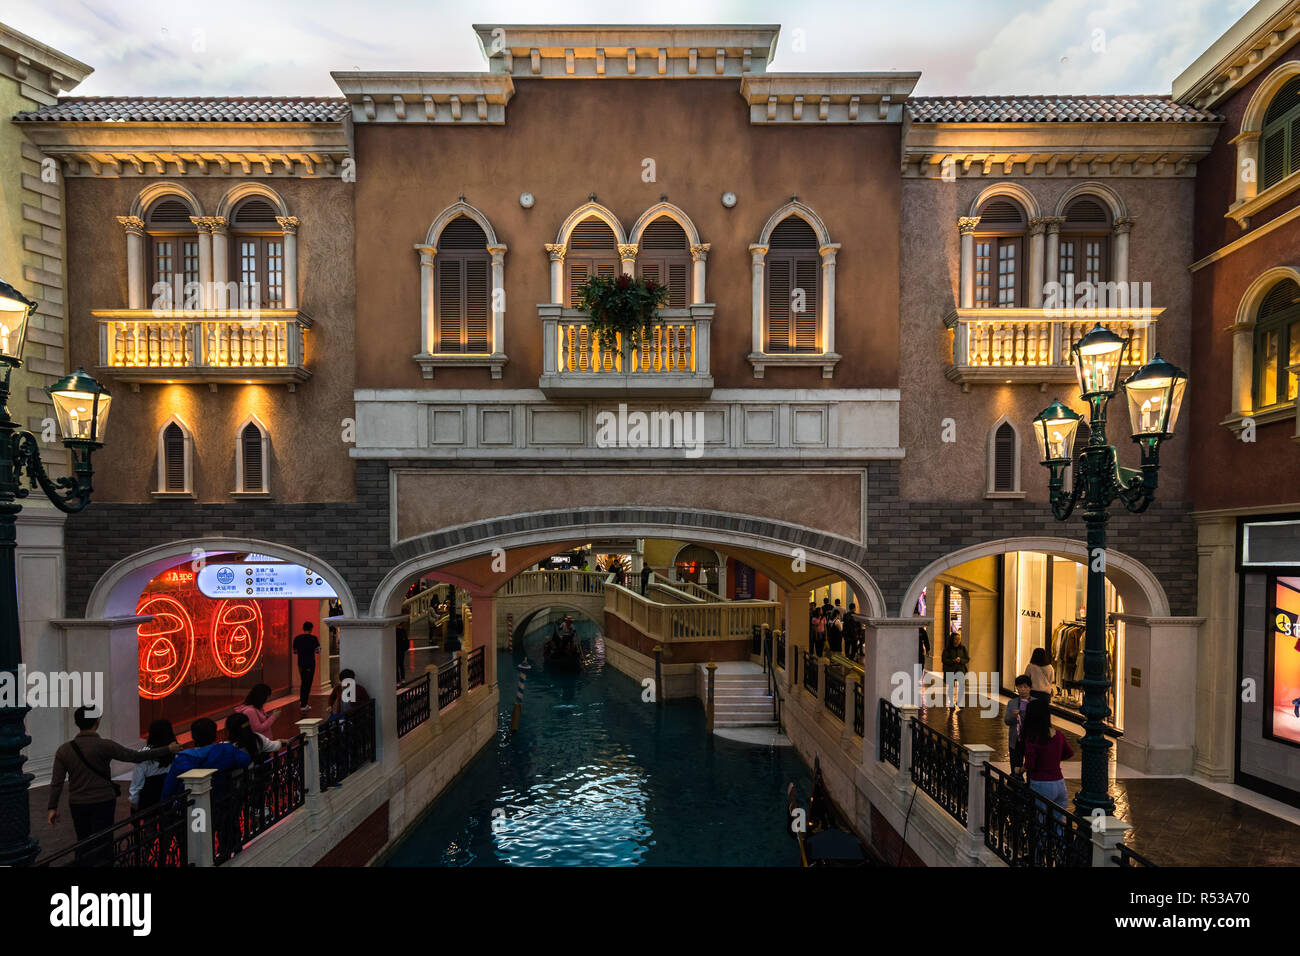 Shopping mall inside The Venetian Casino, with buildings and canals in  Venice style. Macau, January 2018 Stock Photo - Alamy